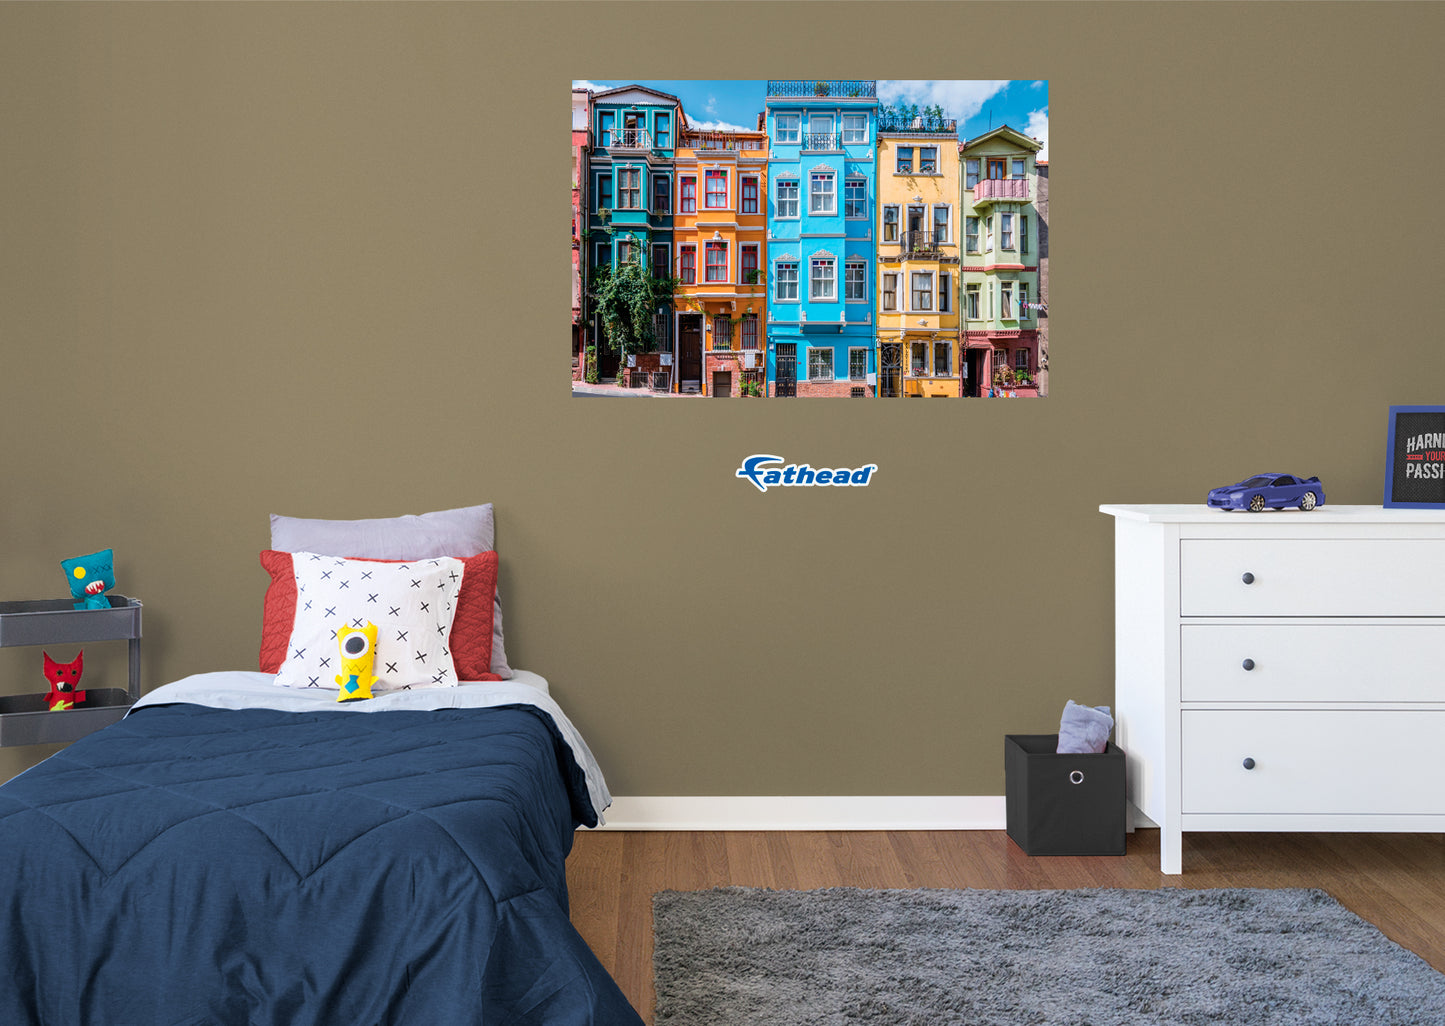 Generic Scenery: Colored Houses Poster        -   Removable     Adhesive Decal